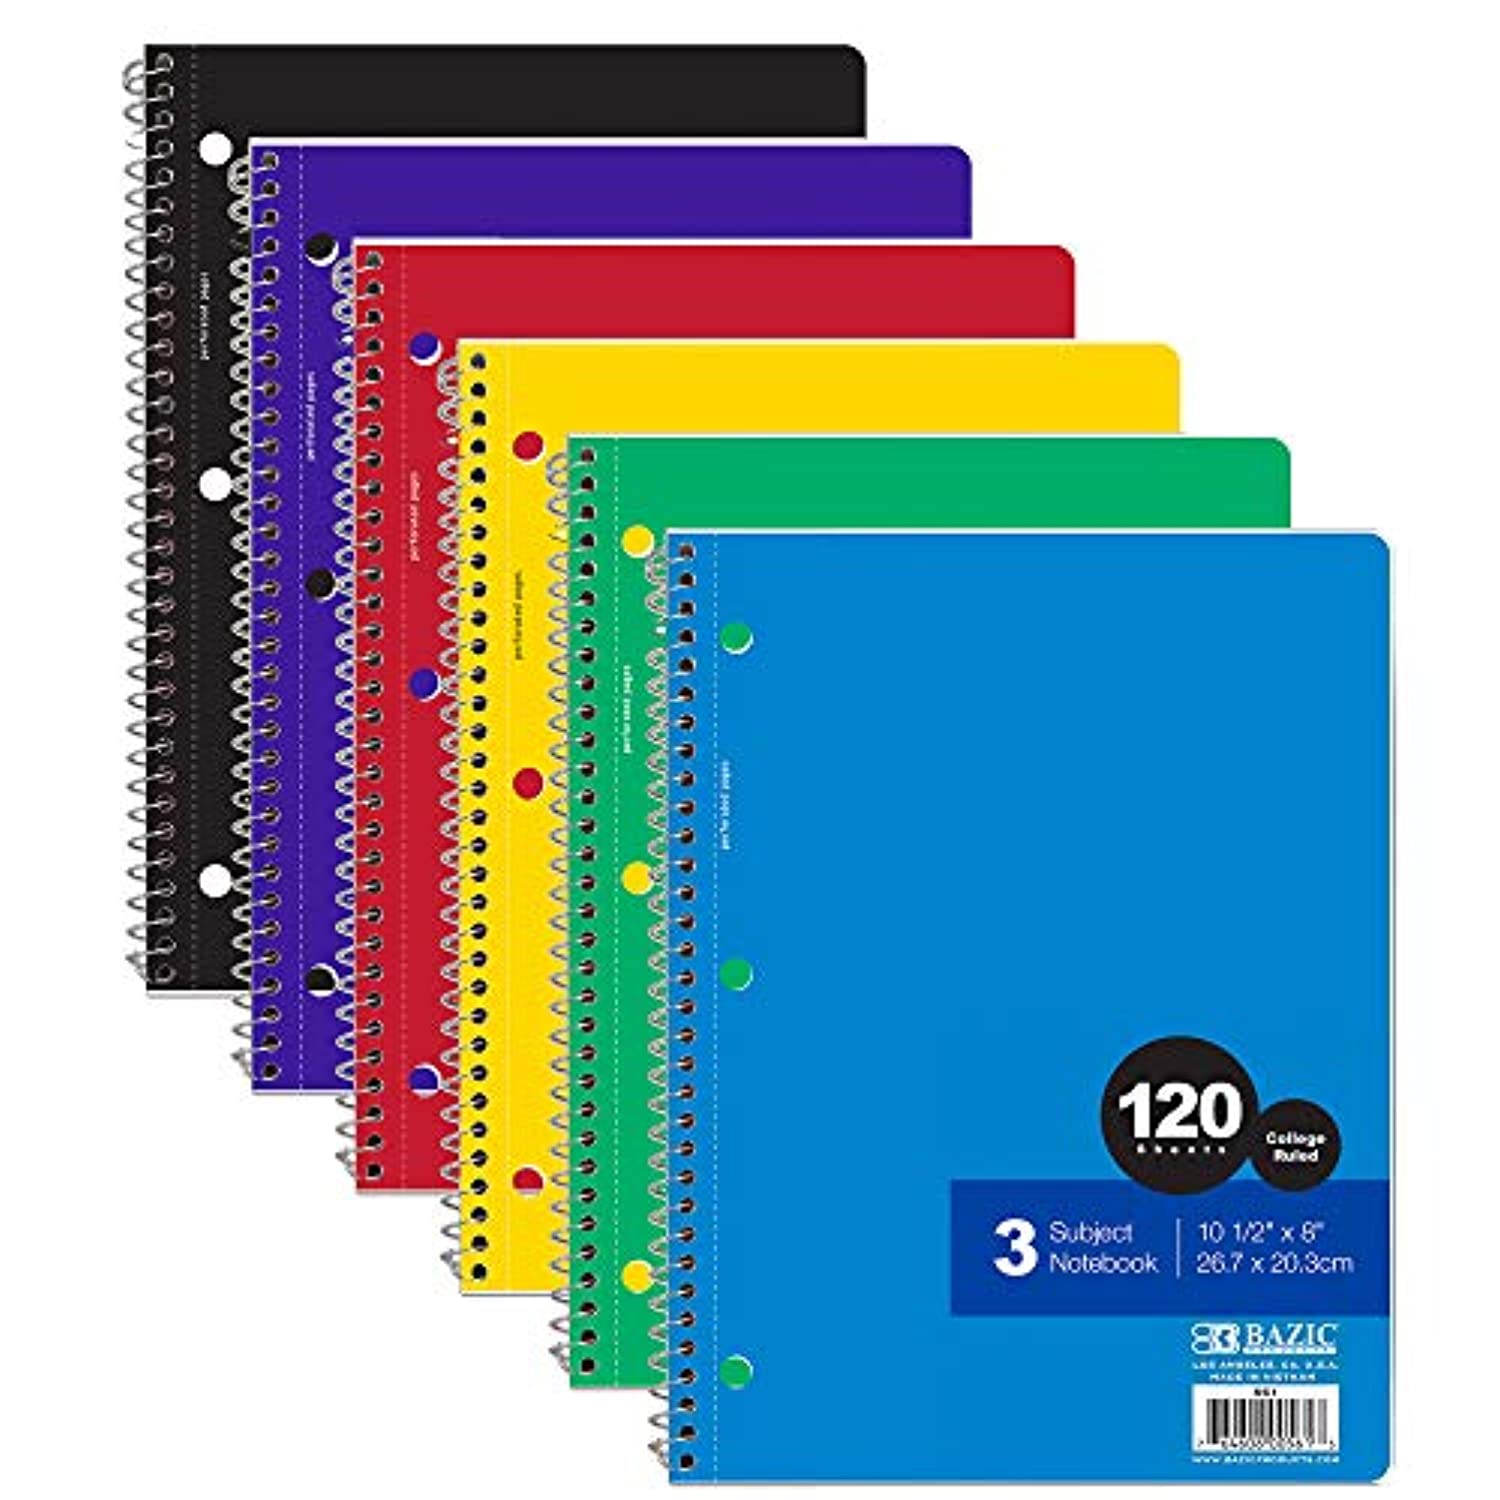 BAZIC College Ruled 120 Sheets 3-Subject Spiral Notebook, Writing Journal Dairy Assignment with Lined Notebooks, for Office Class Students, 24-Pack.